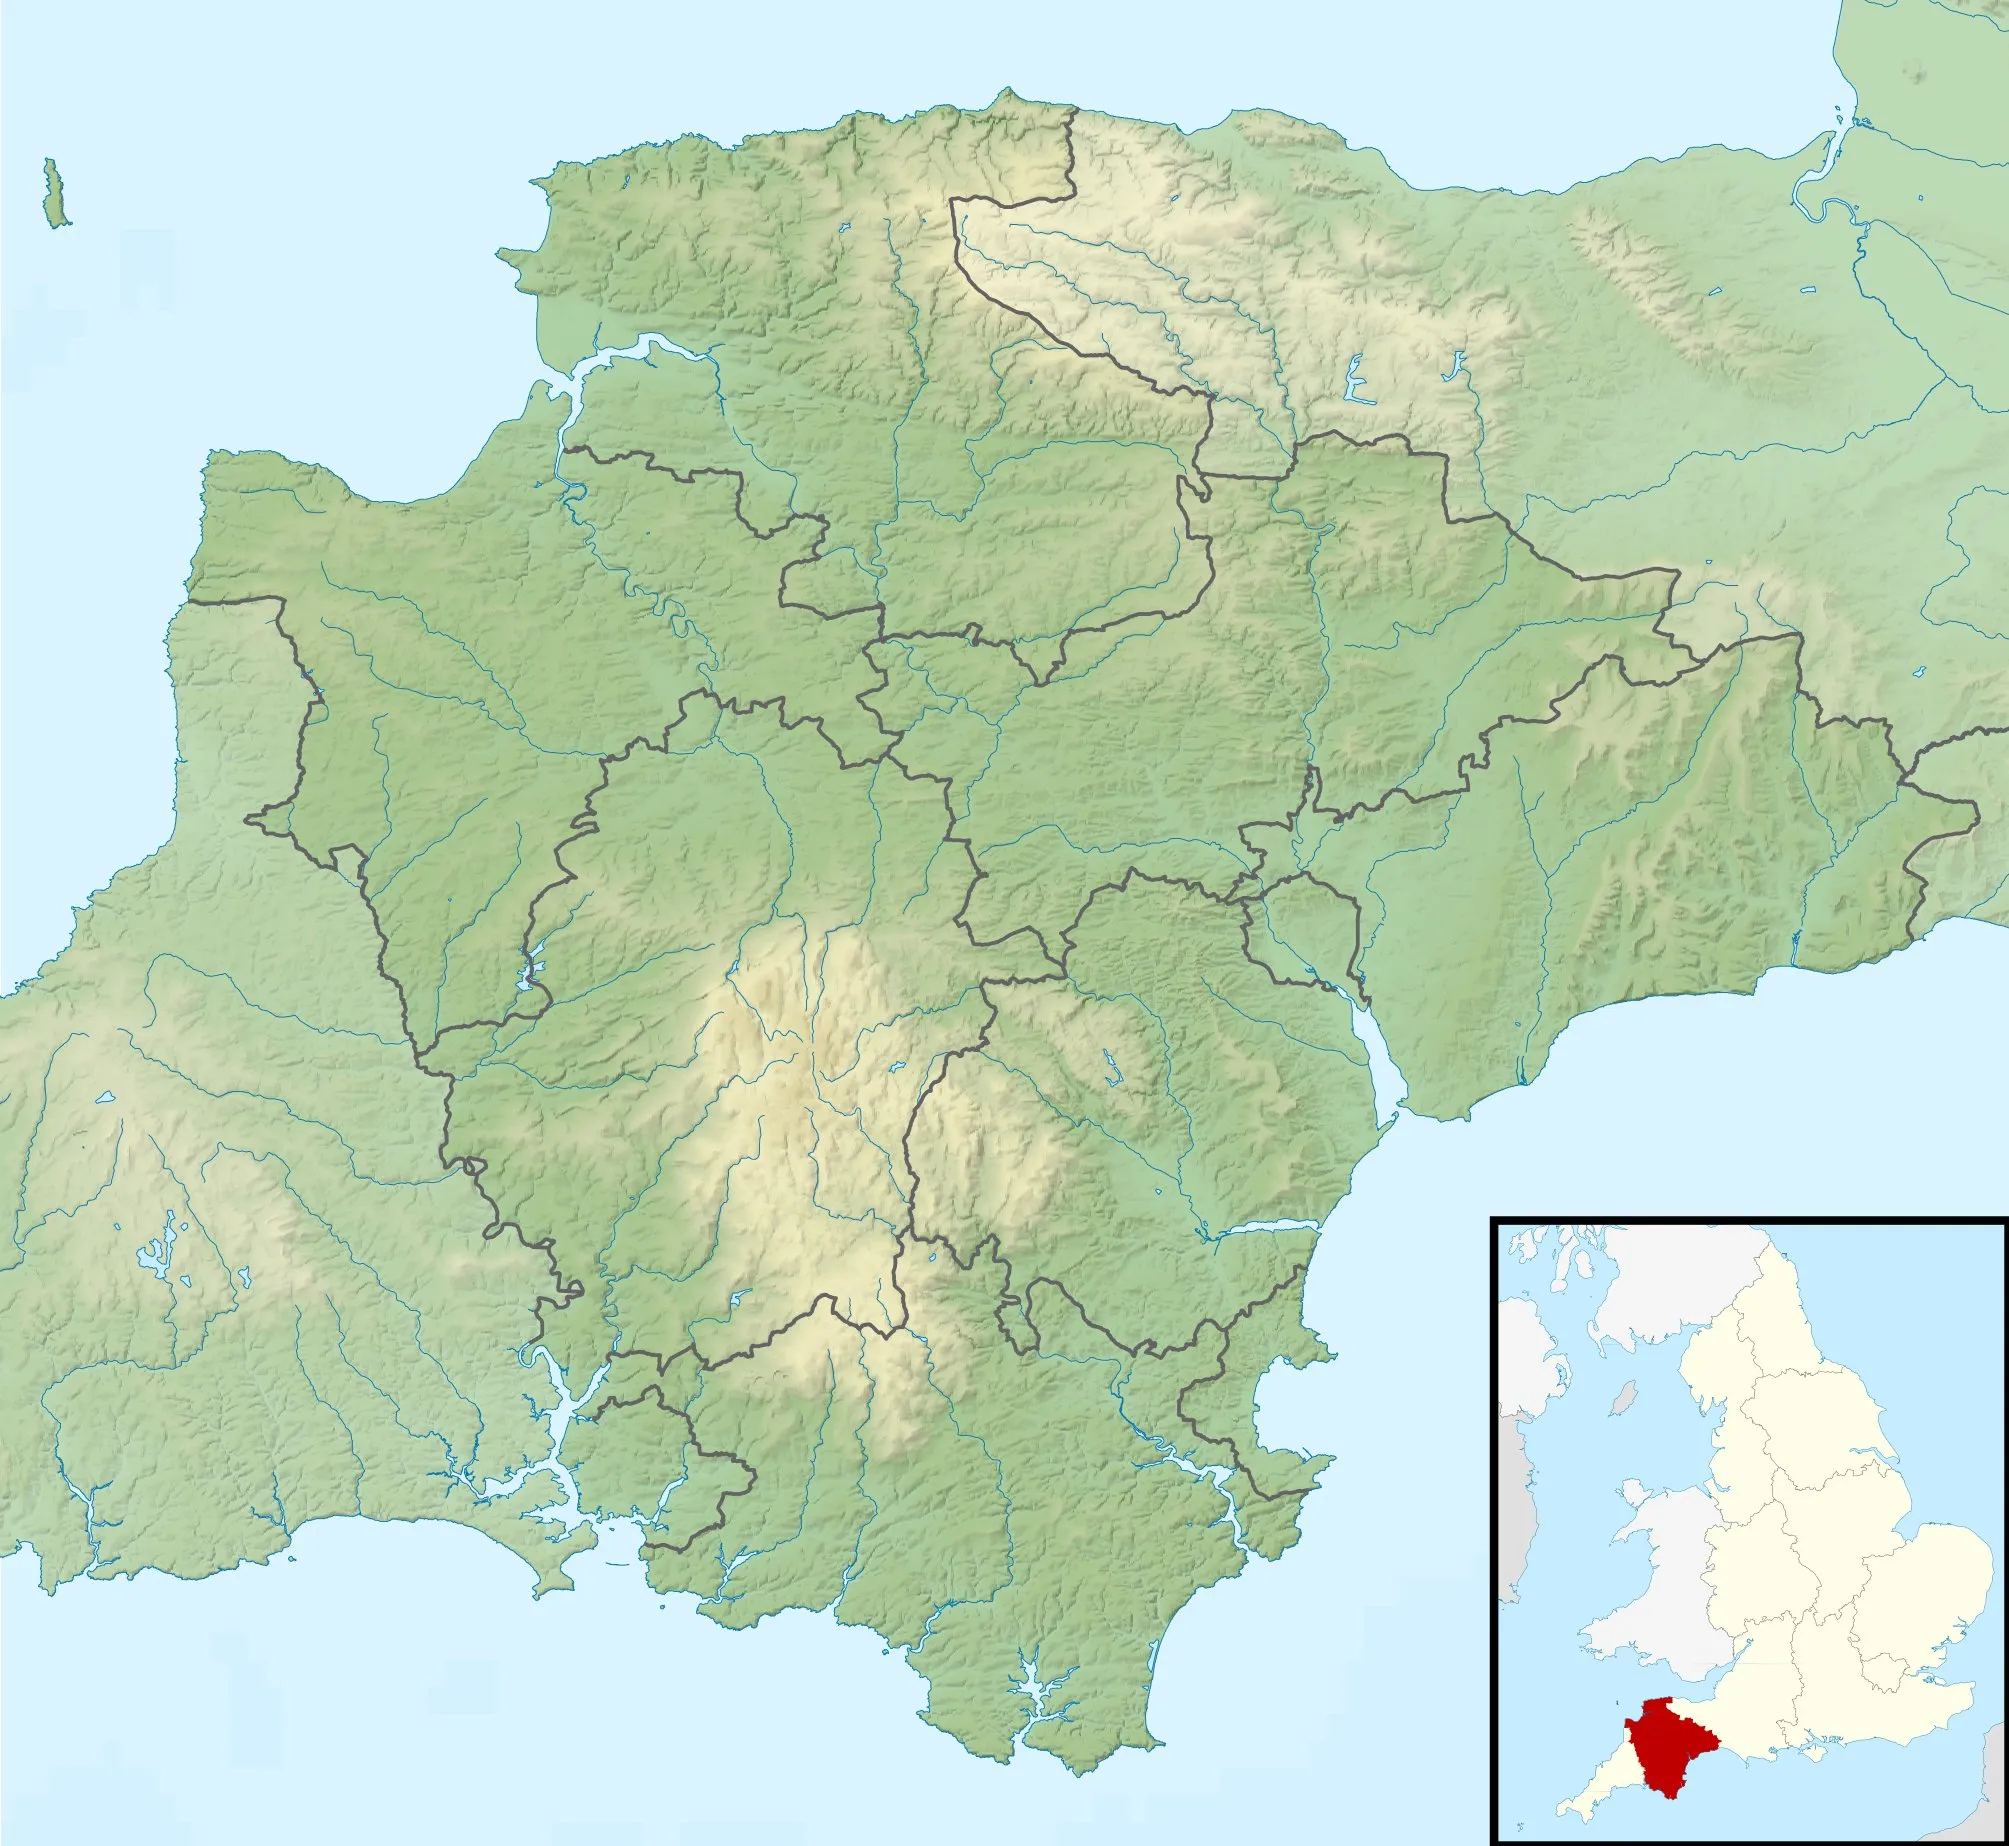 Photo showing: Relief map of Devon, UK.
Equirectangular map projection on WGS 84 datum, with N/S stretched 150%
Geographic limits:

West: 4.72W
East: 2.86W
North: 51.3N
South: 50.16N